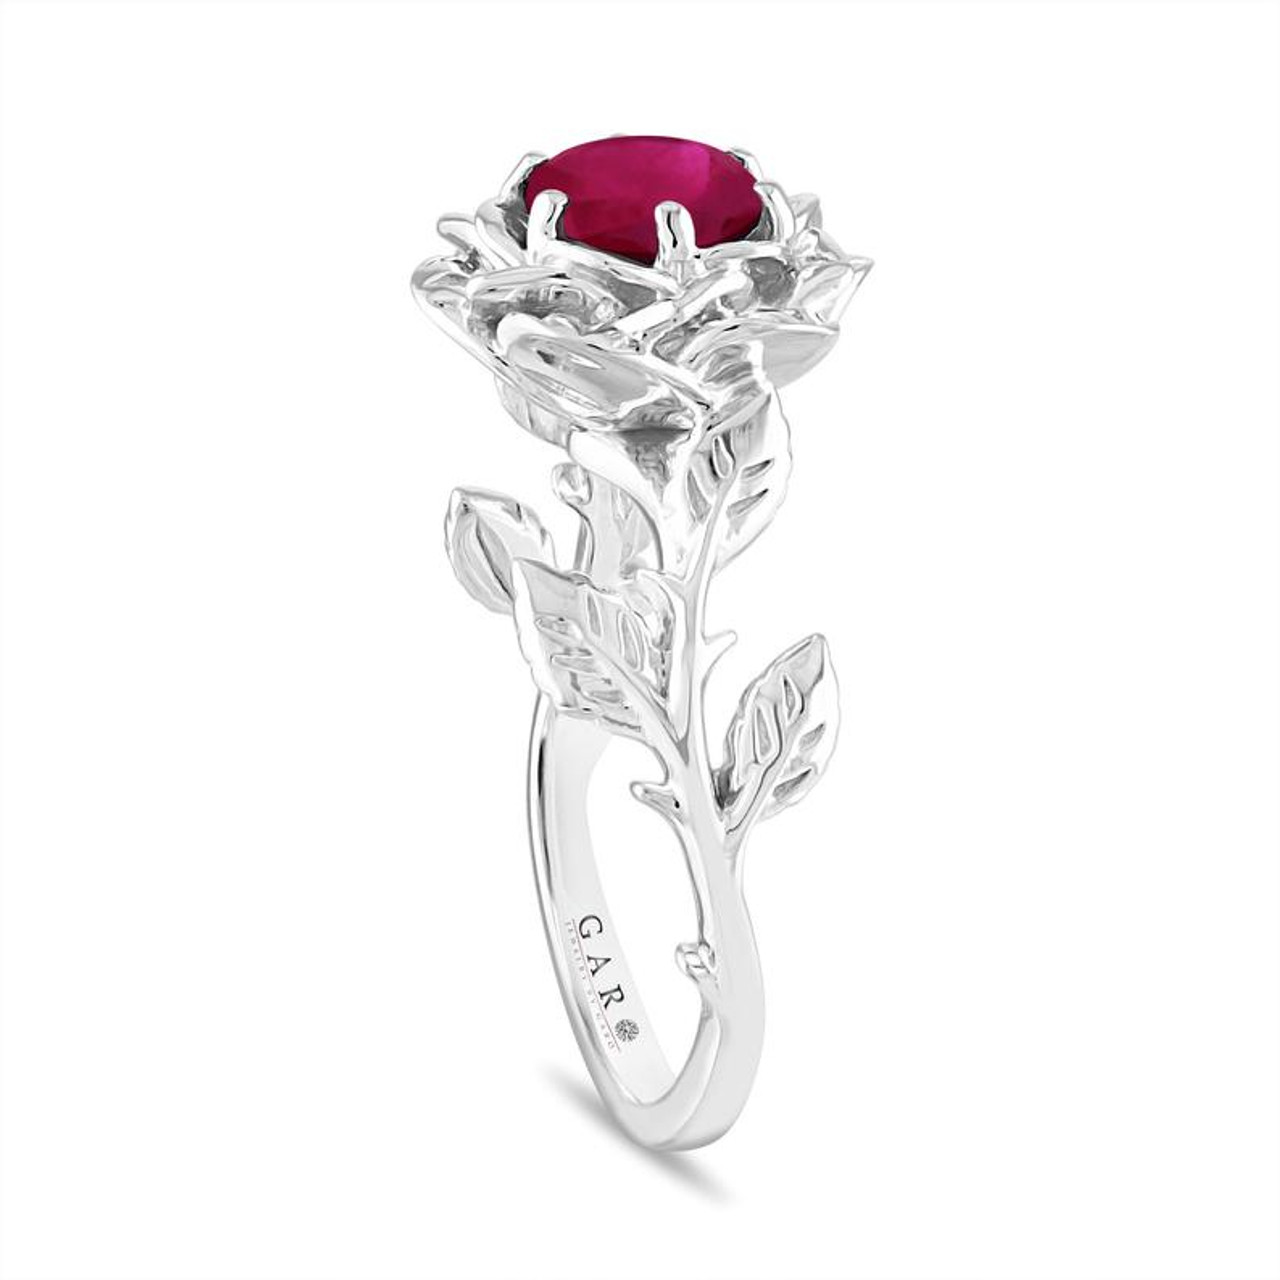 Platinum Ruby Floral Engagement Ring, Rose Flower Anniversary Ring, Unique  0.60 Carat Handmade Certified